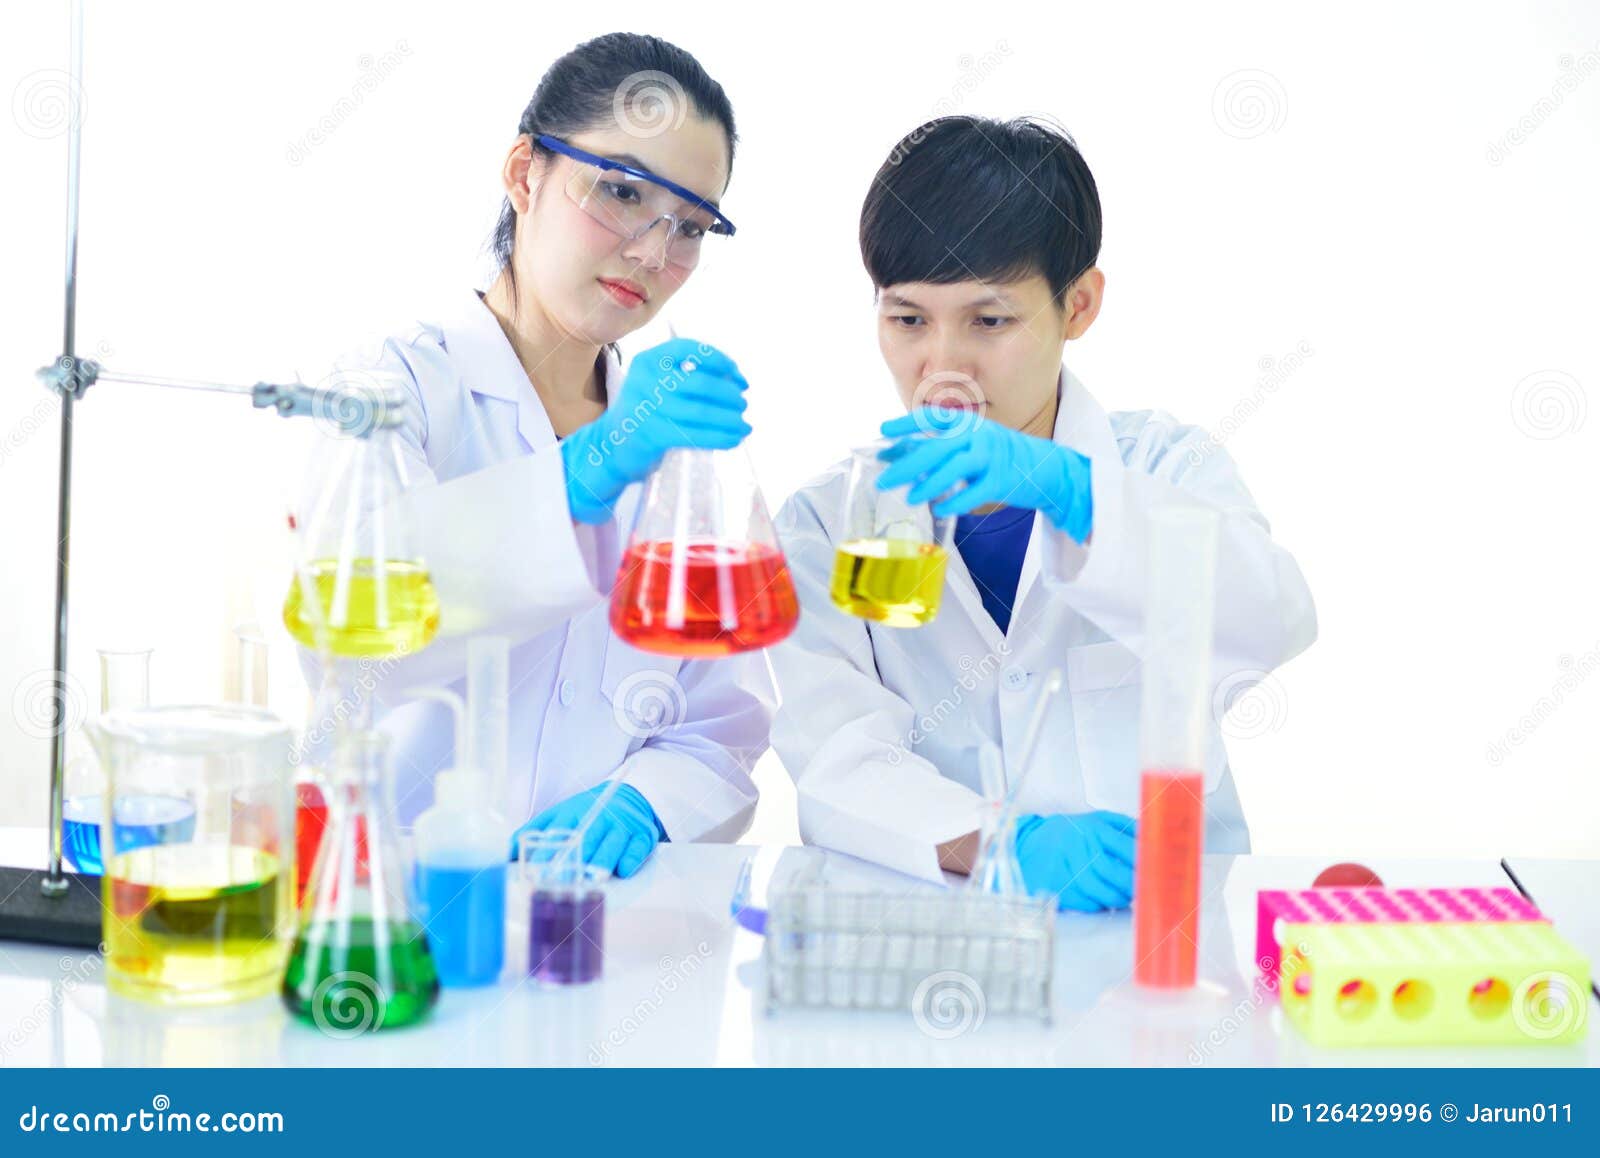 Asian Female Scientists Working in Laboratory Stock Photo - Image of ...